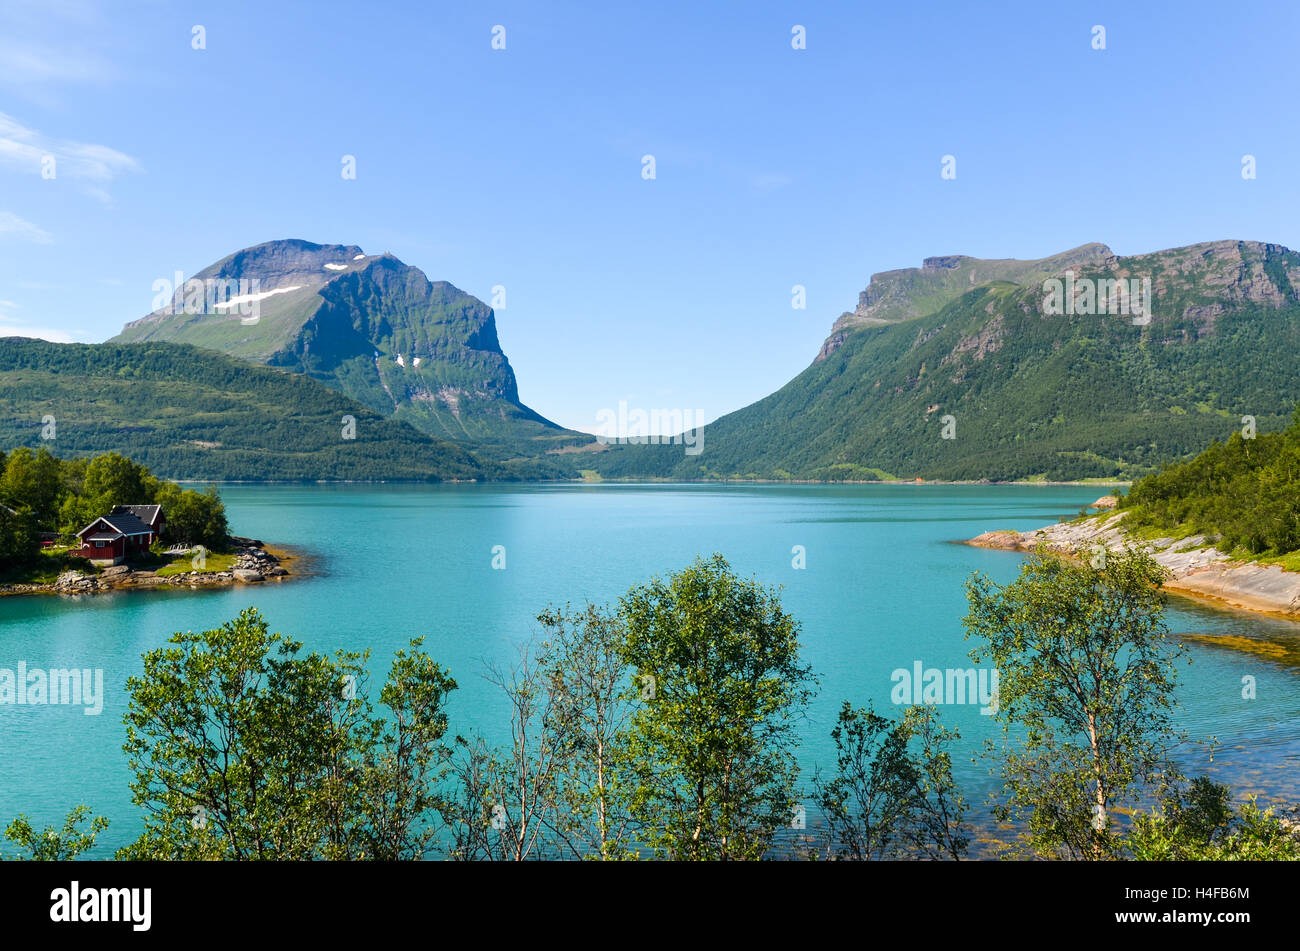 Cabin by the turquoise waters of Glomfjord, Northern Norway Stock Photo